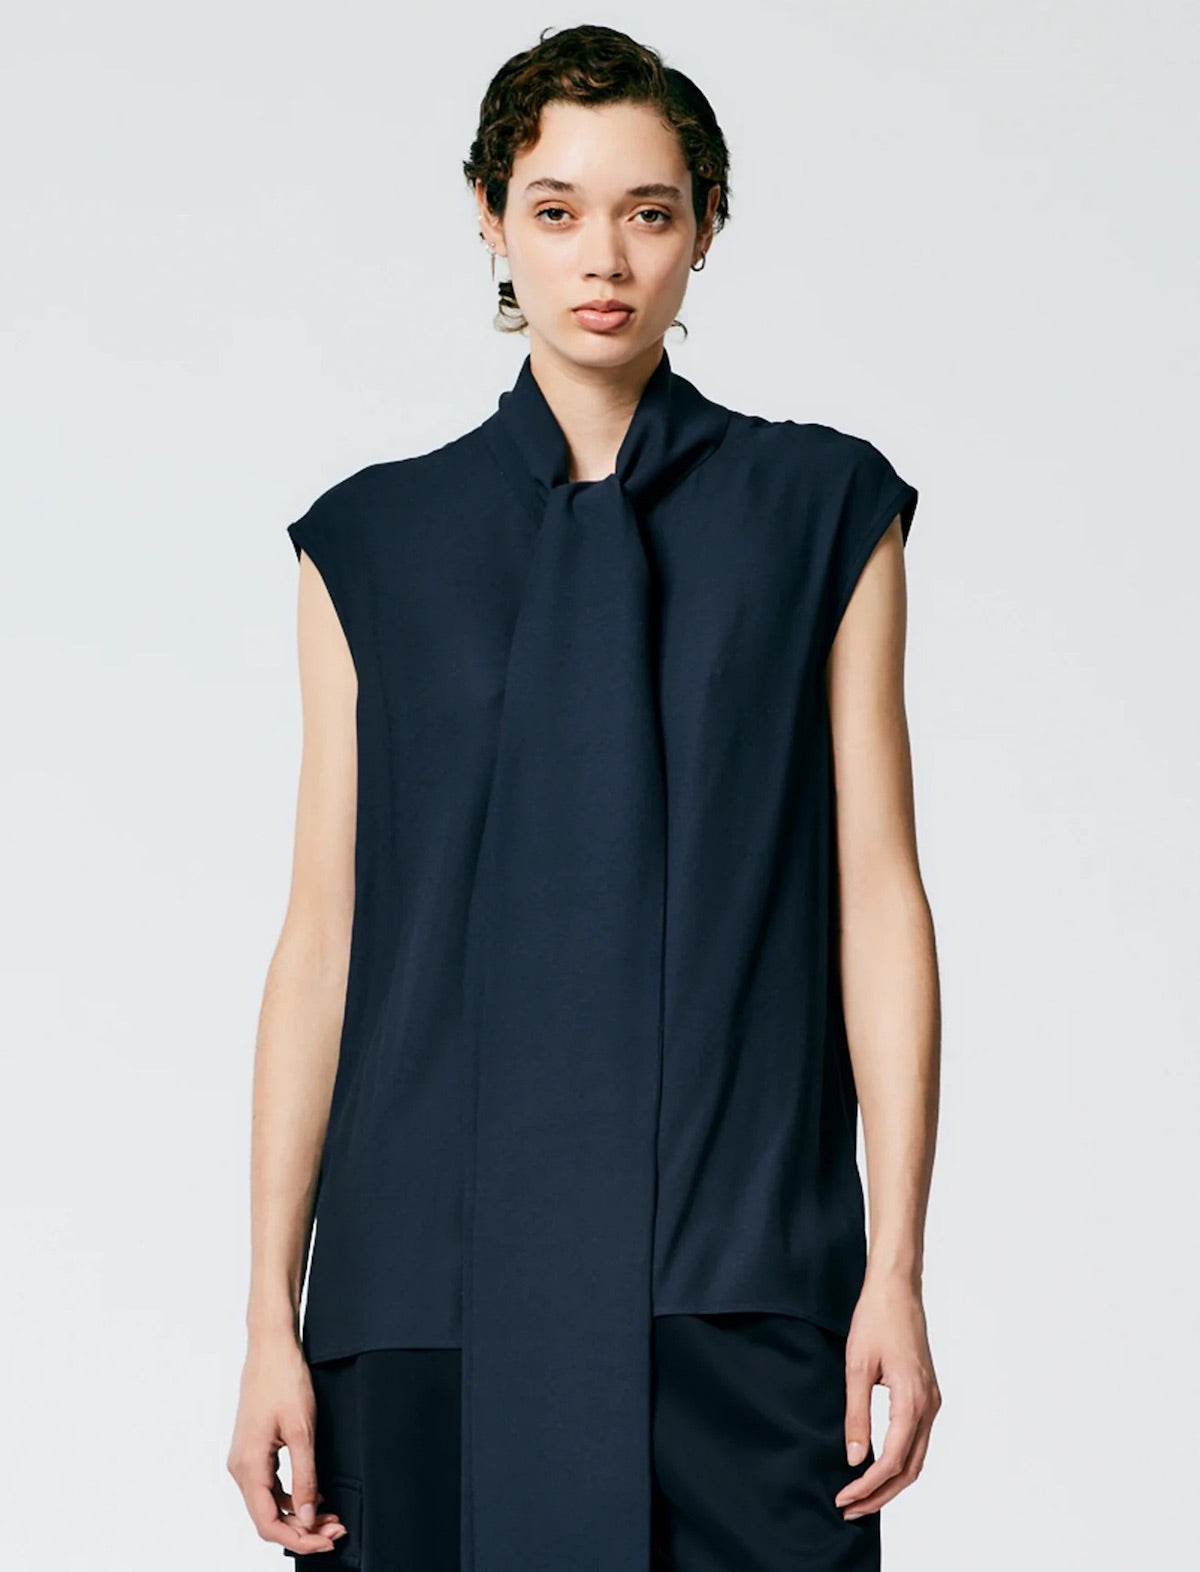 TIBI Feather Weight Eco Crepe Sleeveless Davenport Sculpted Shirt in Navy